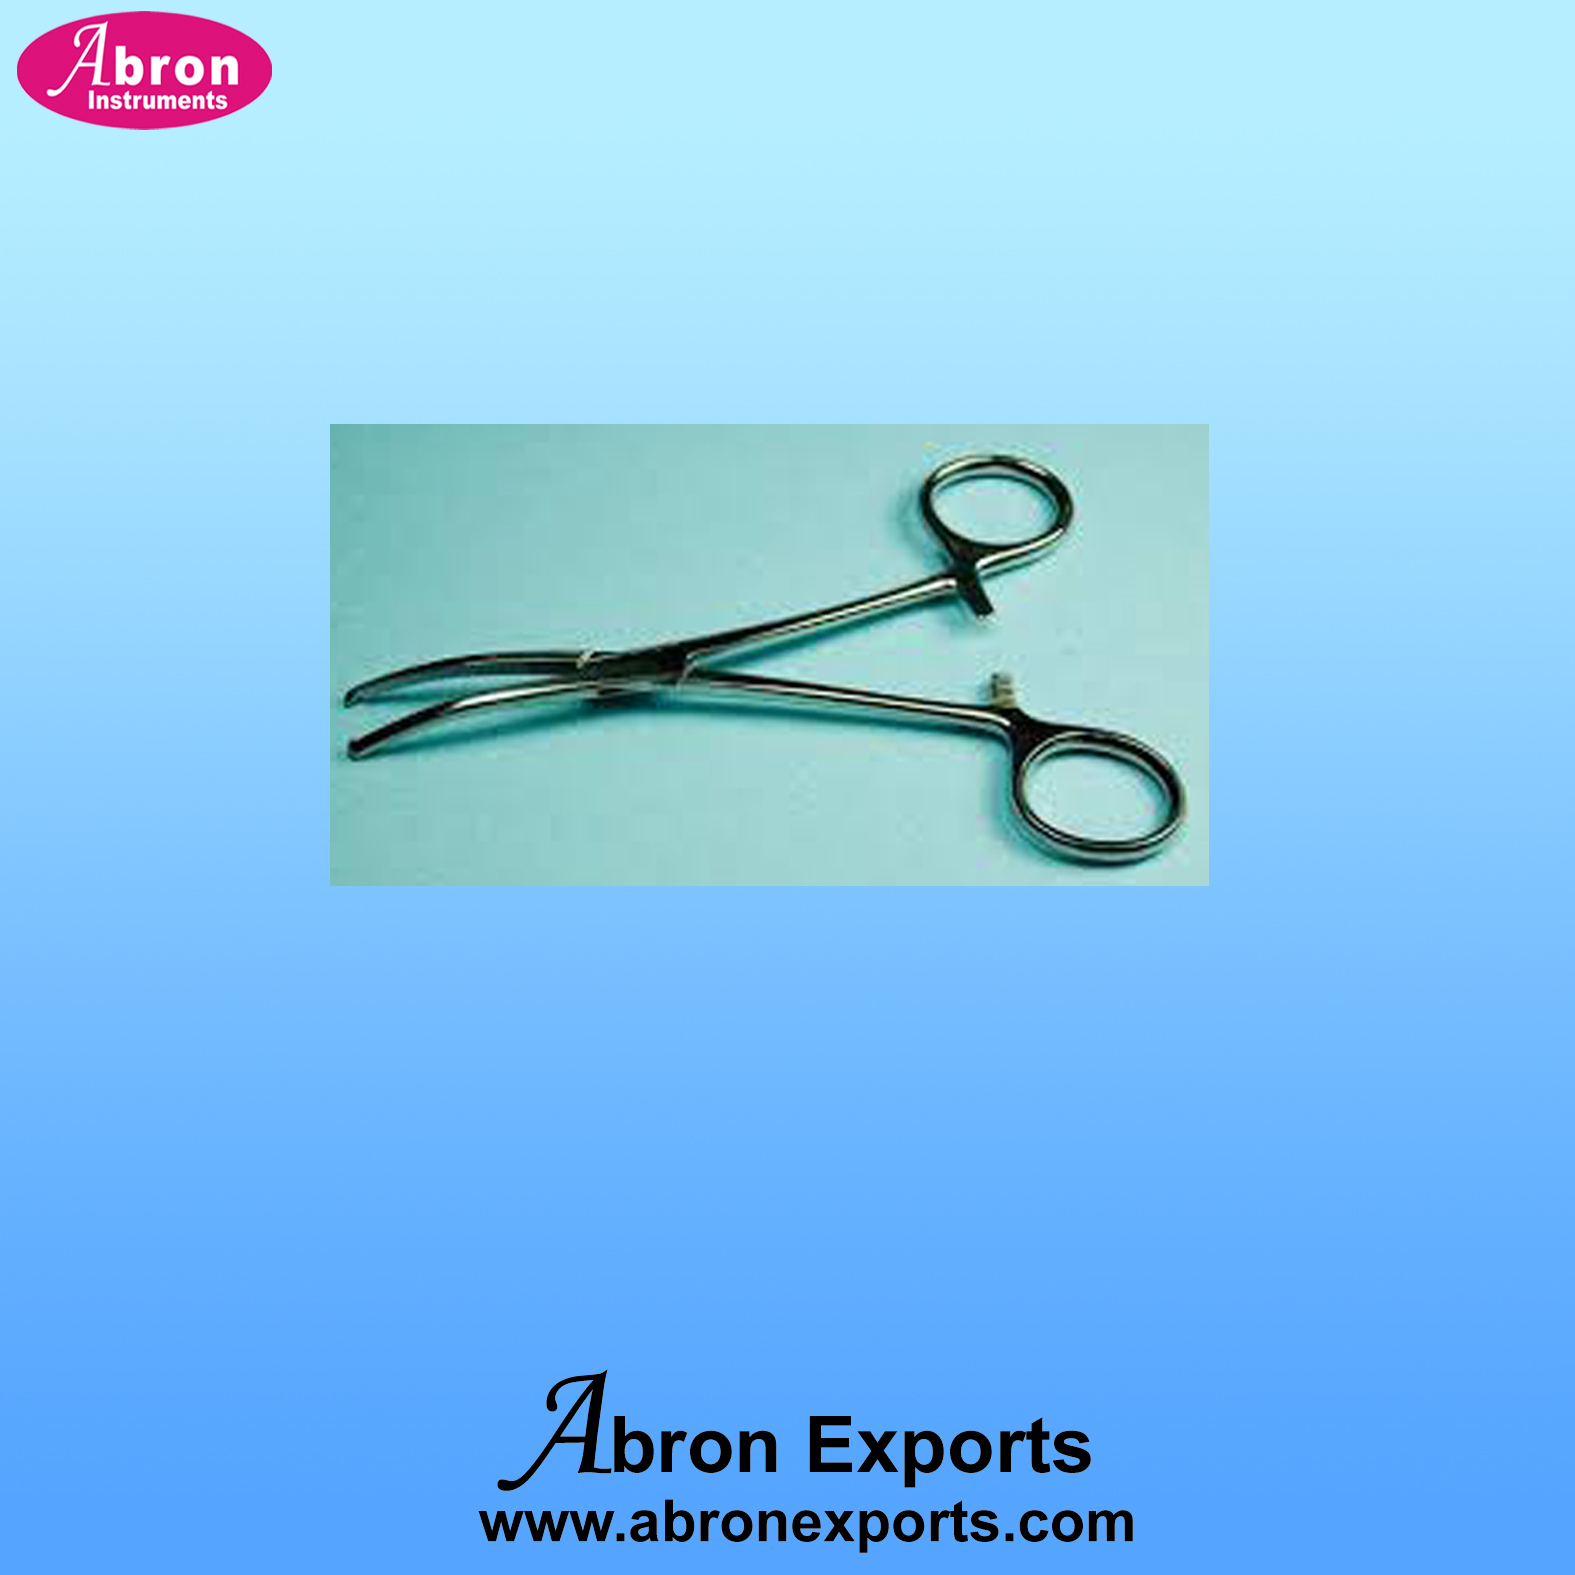 Surgical abron forceps heamostetical curved ABM-2620-25 